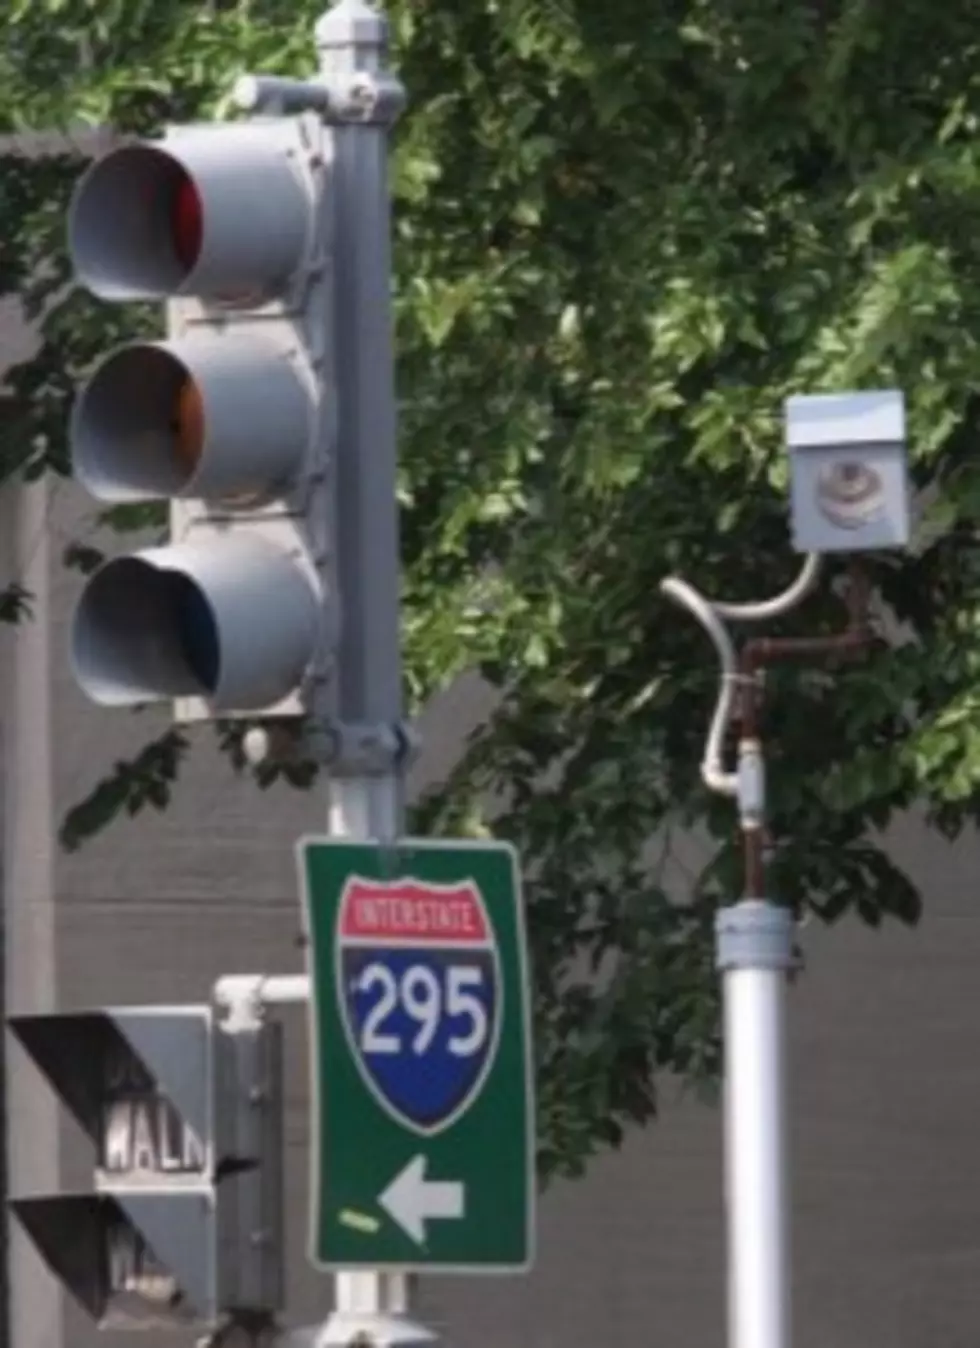 More Red Light Cameras Could Be Coming To Amarillo